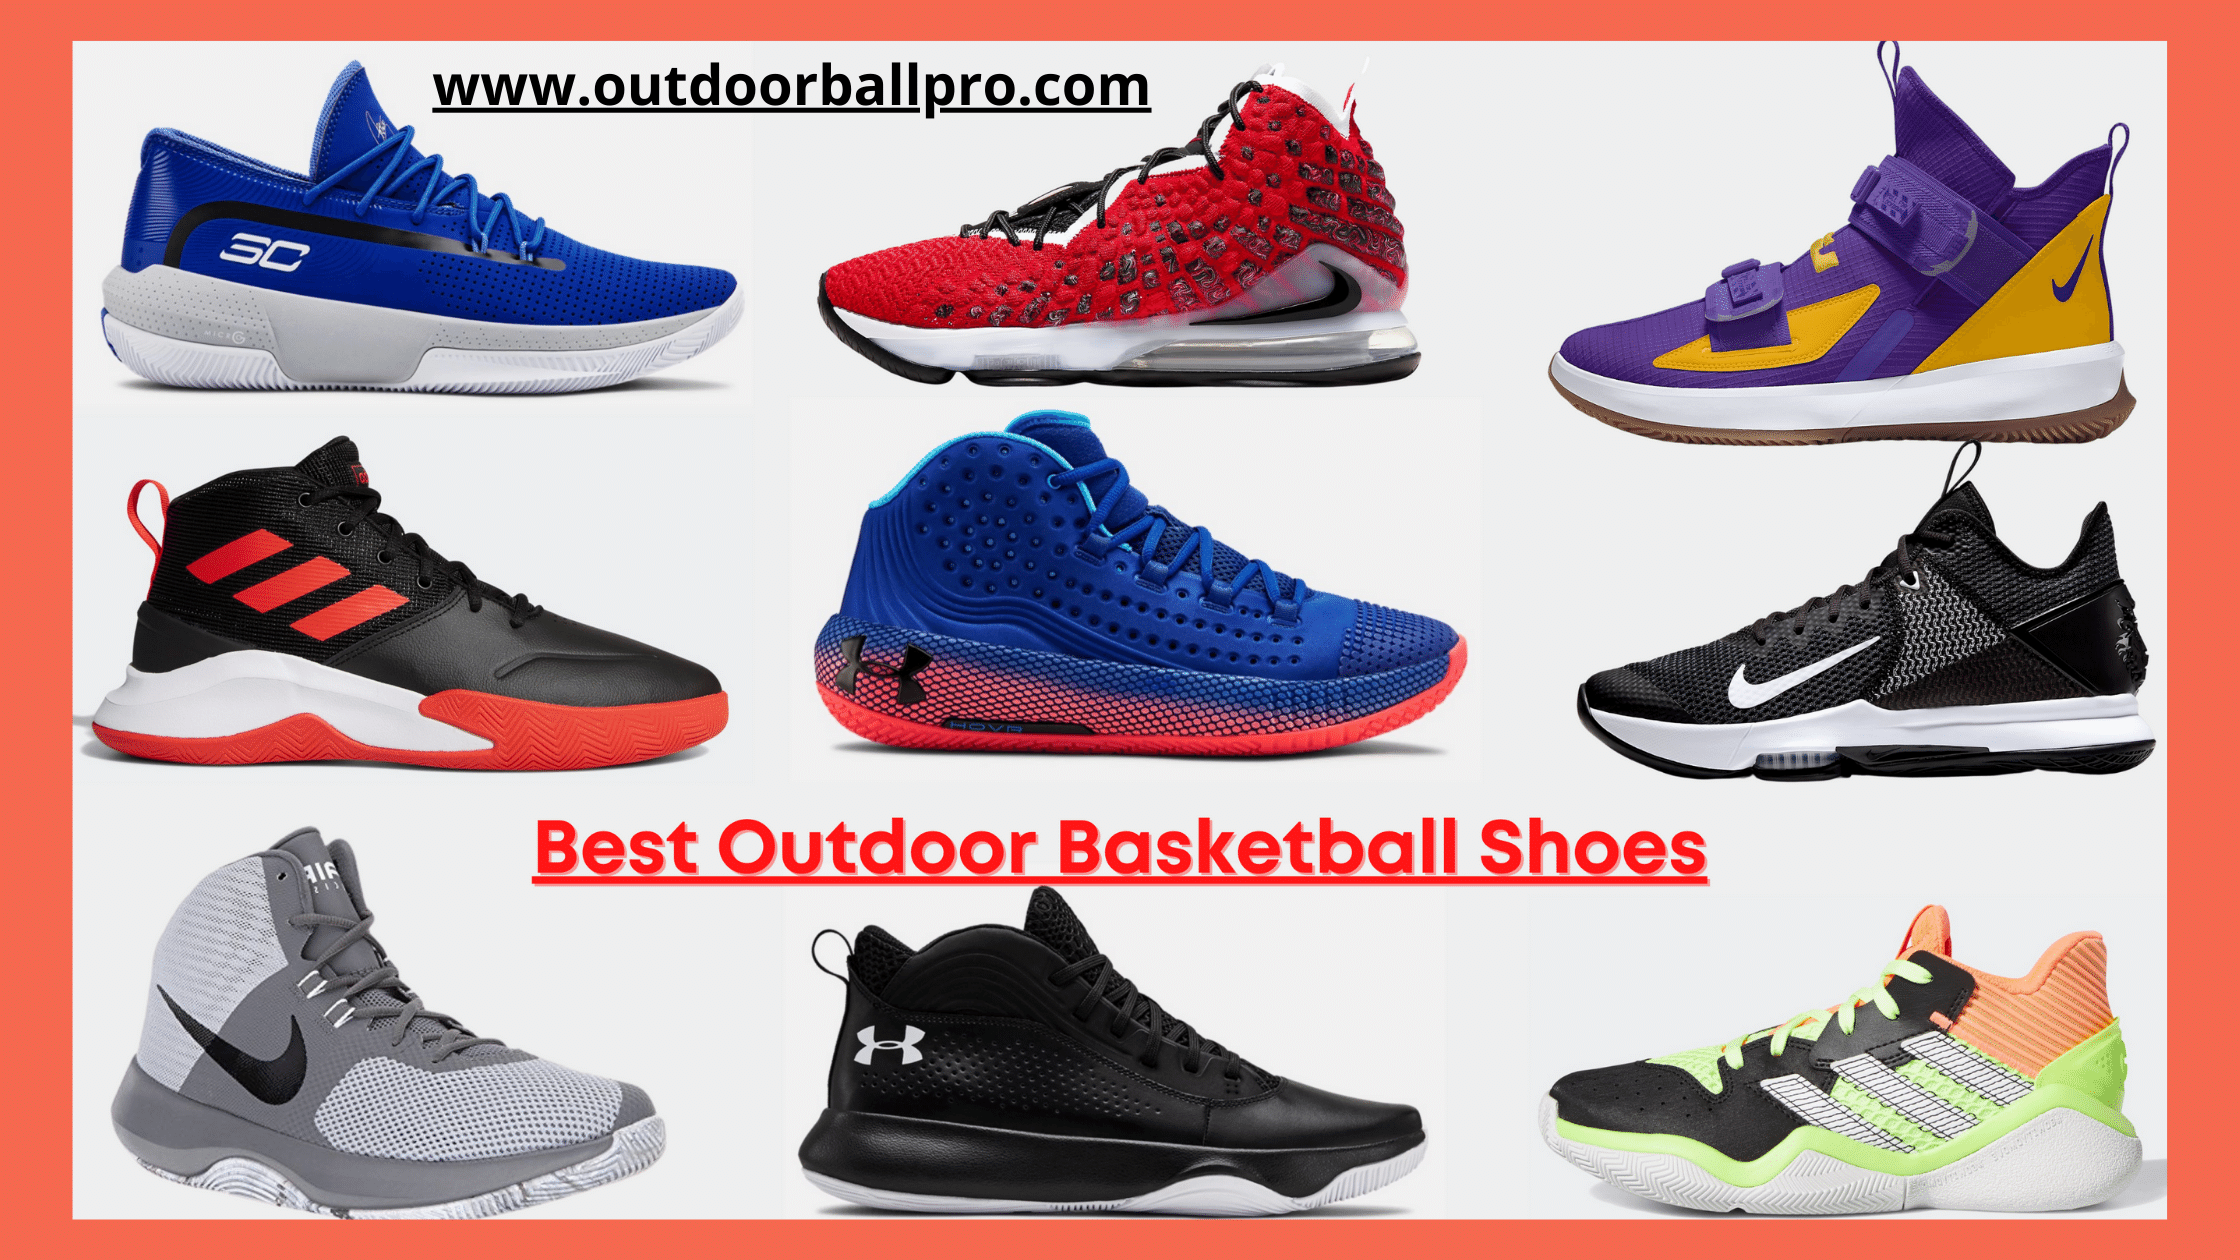 Best Outdoor Basketball Shoes 2021 - 9 